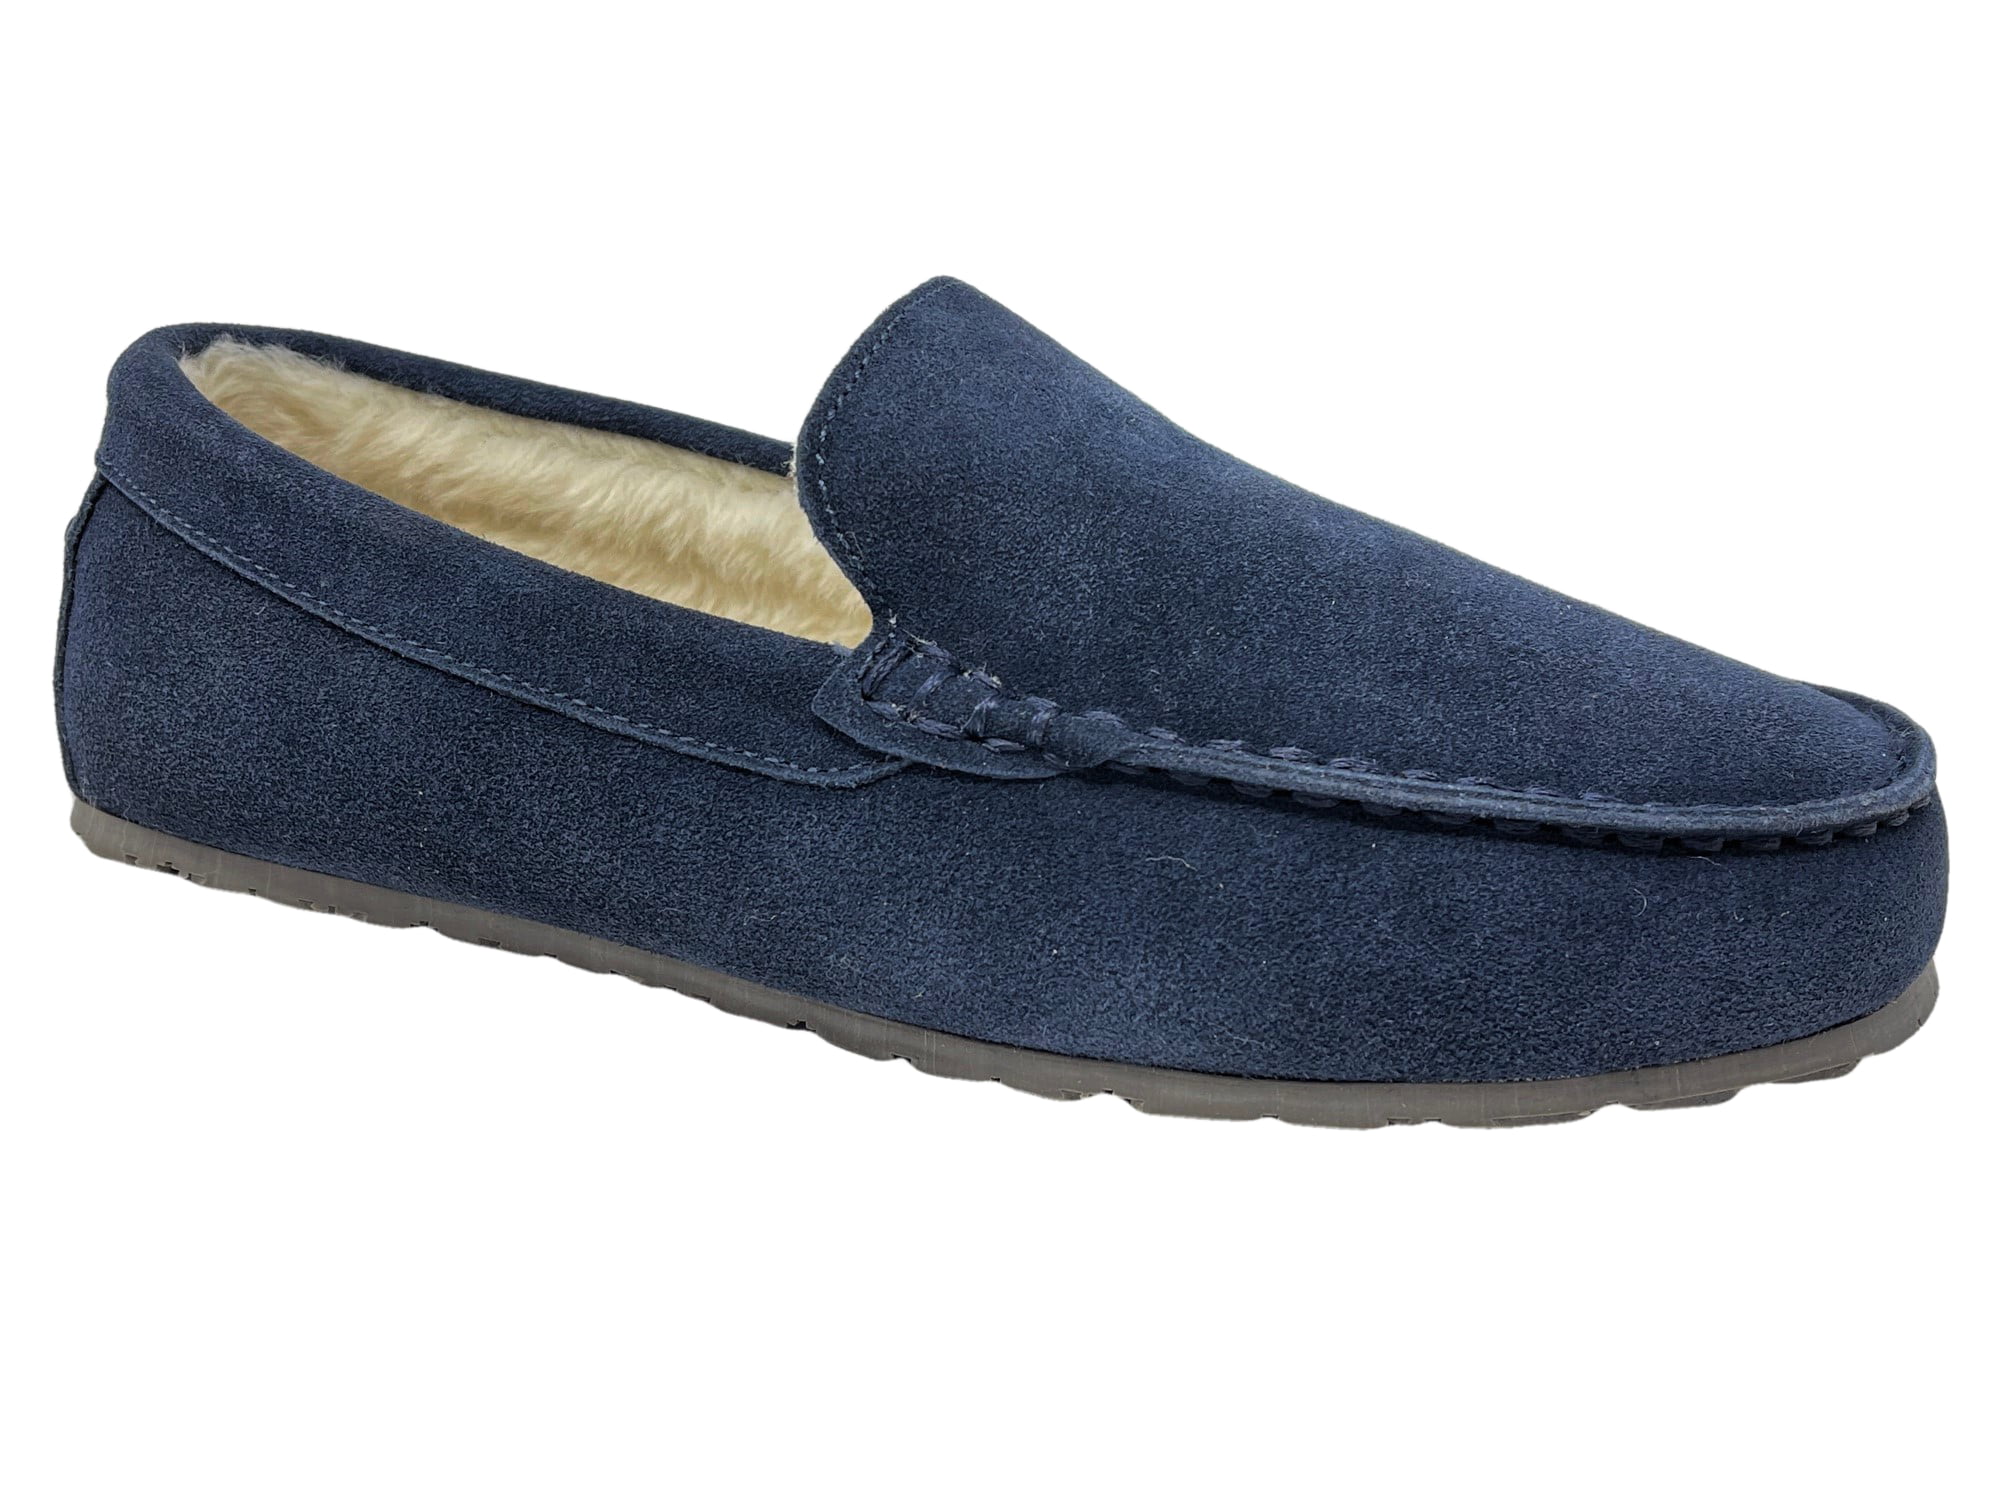 Clarks KITE BRAVE mens suede faux fur lined slippers BNIB